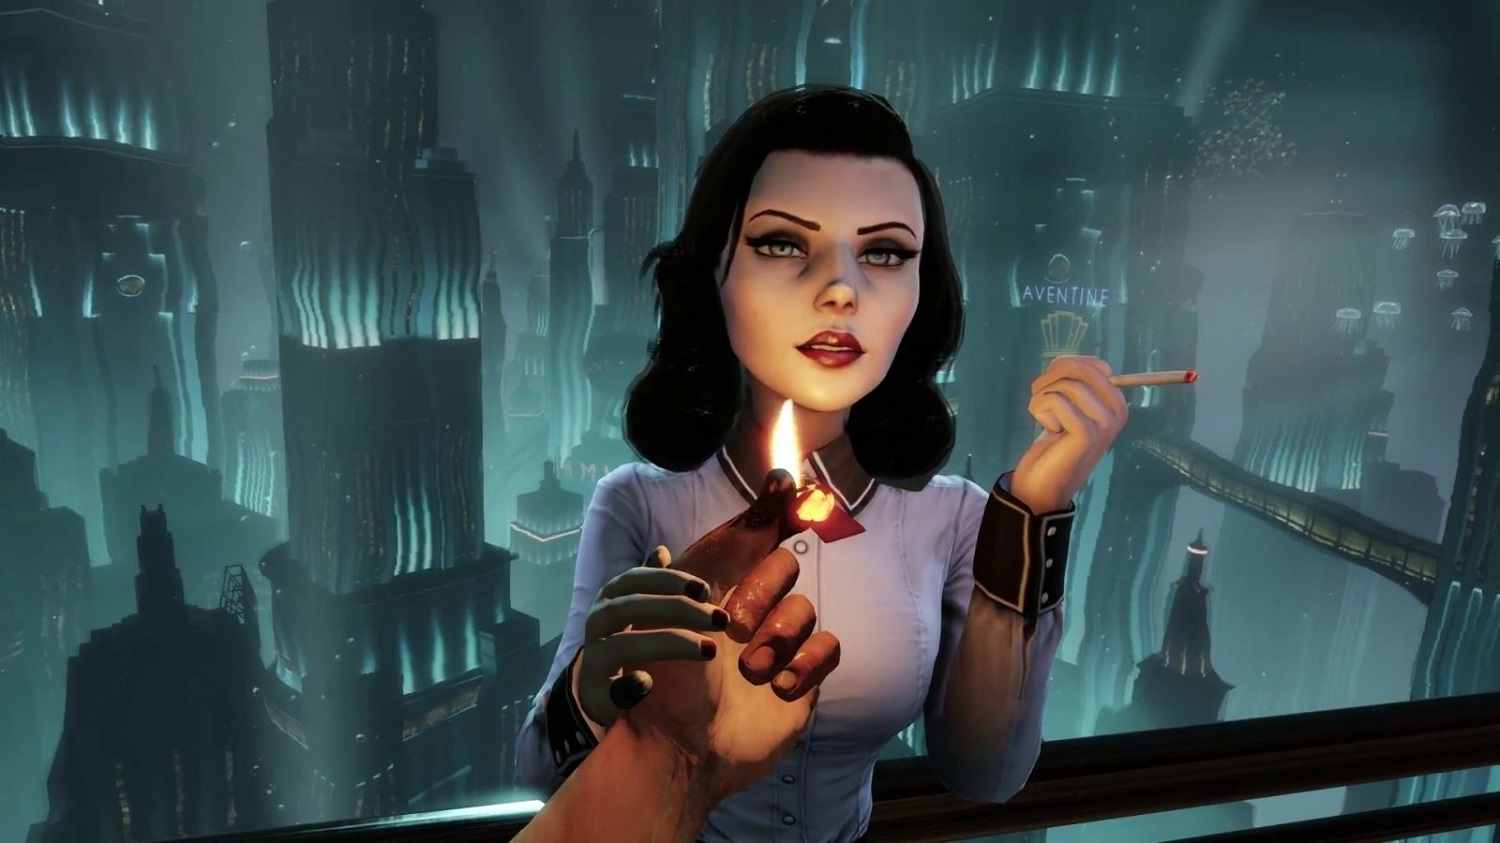 BioShock-Infinite-Burial-at-Sea-Episode-One-Will-Change-Elizabeth-s-Character-Says-Levine-378344-2